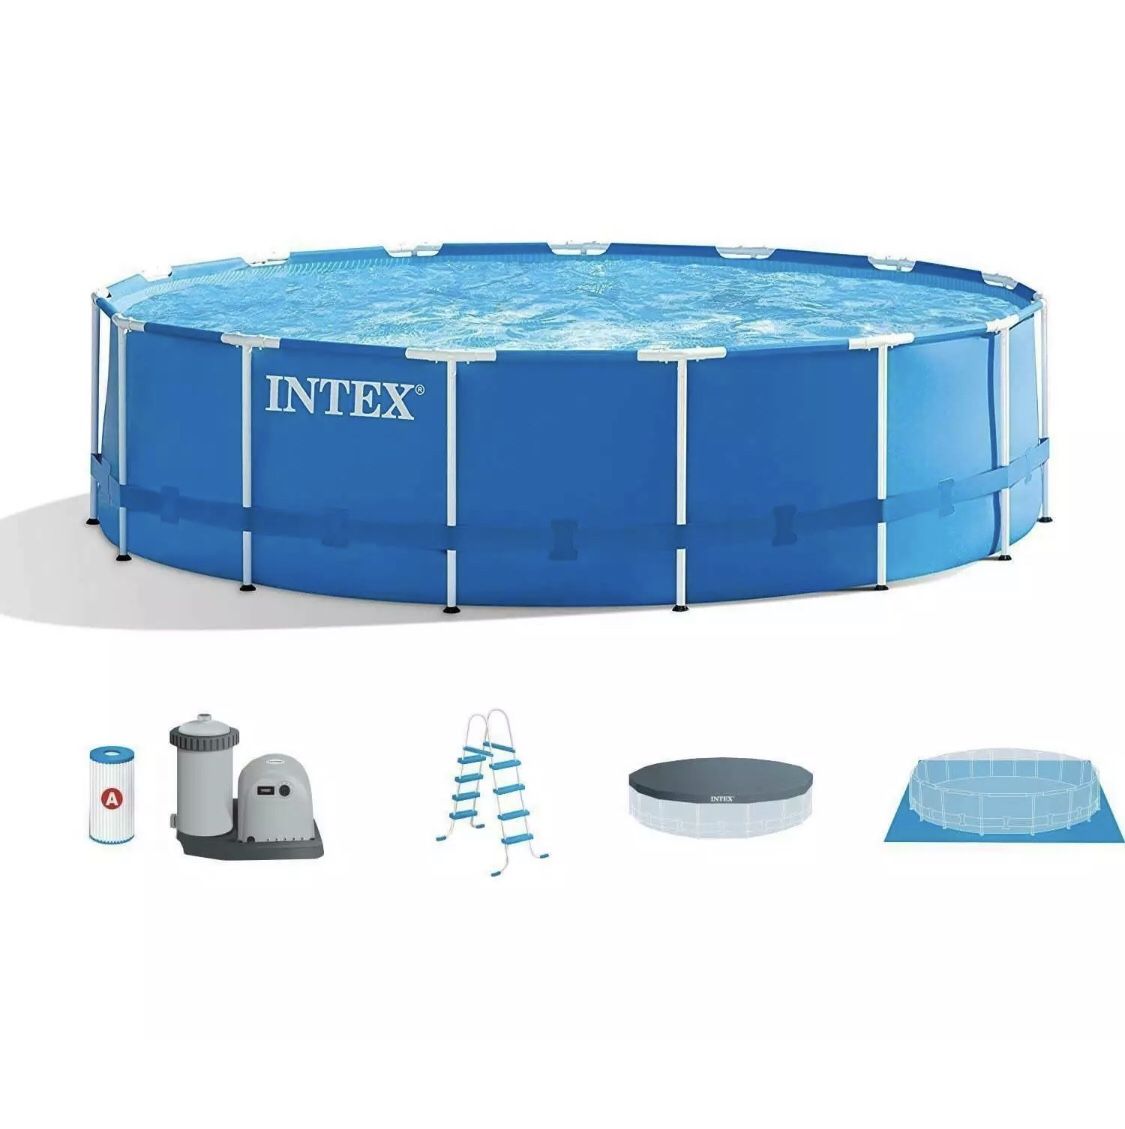 Intex 18ft x 48in Metal Frame Prism Pool COMES WITH EVERYTHING IN PICTURE